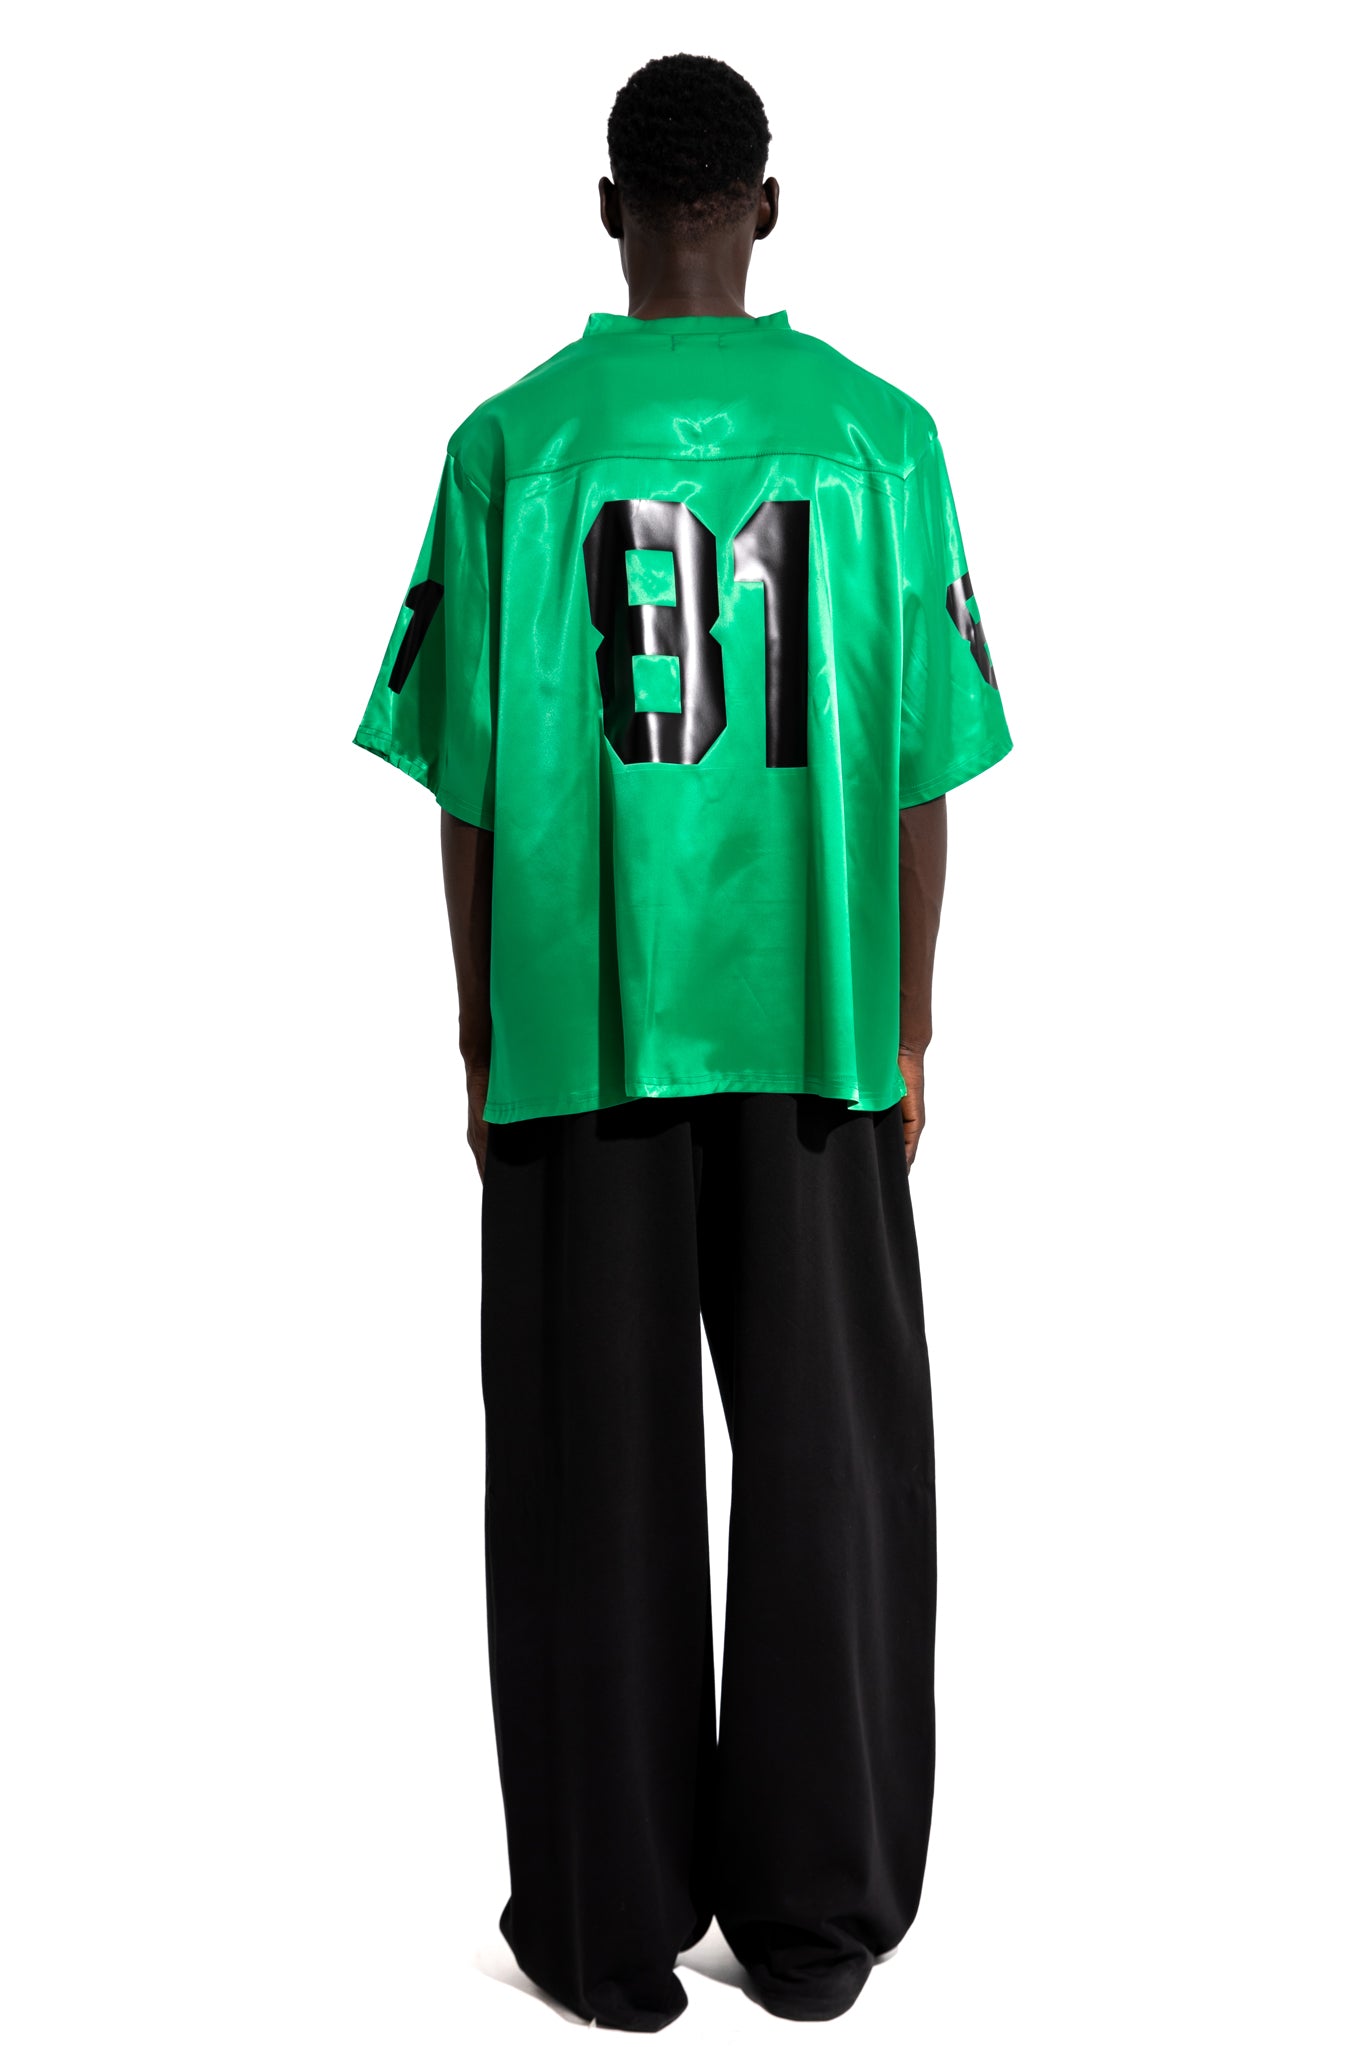 81 OVERSIZED T-SHIRT IN GREEN